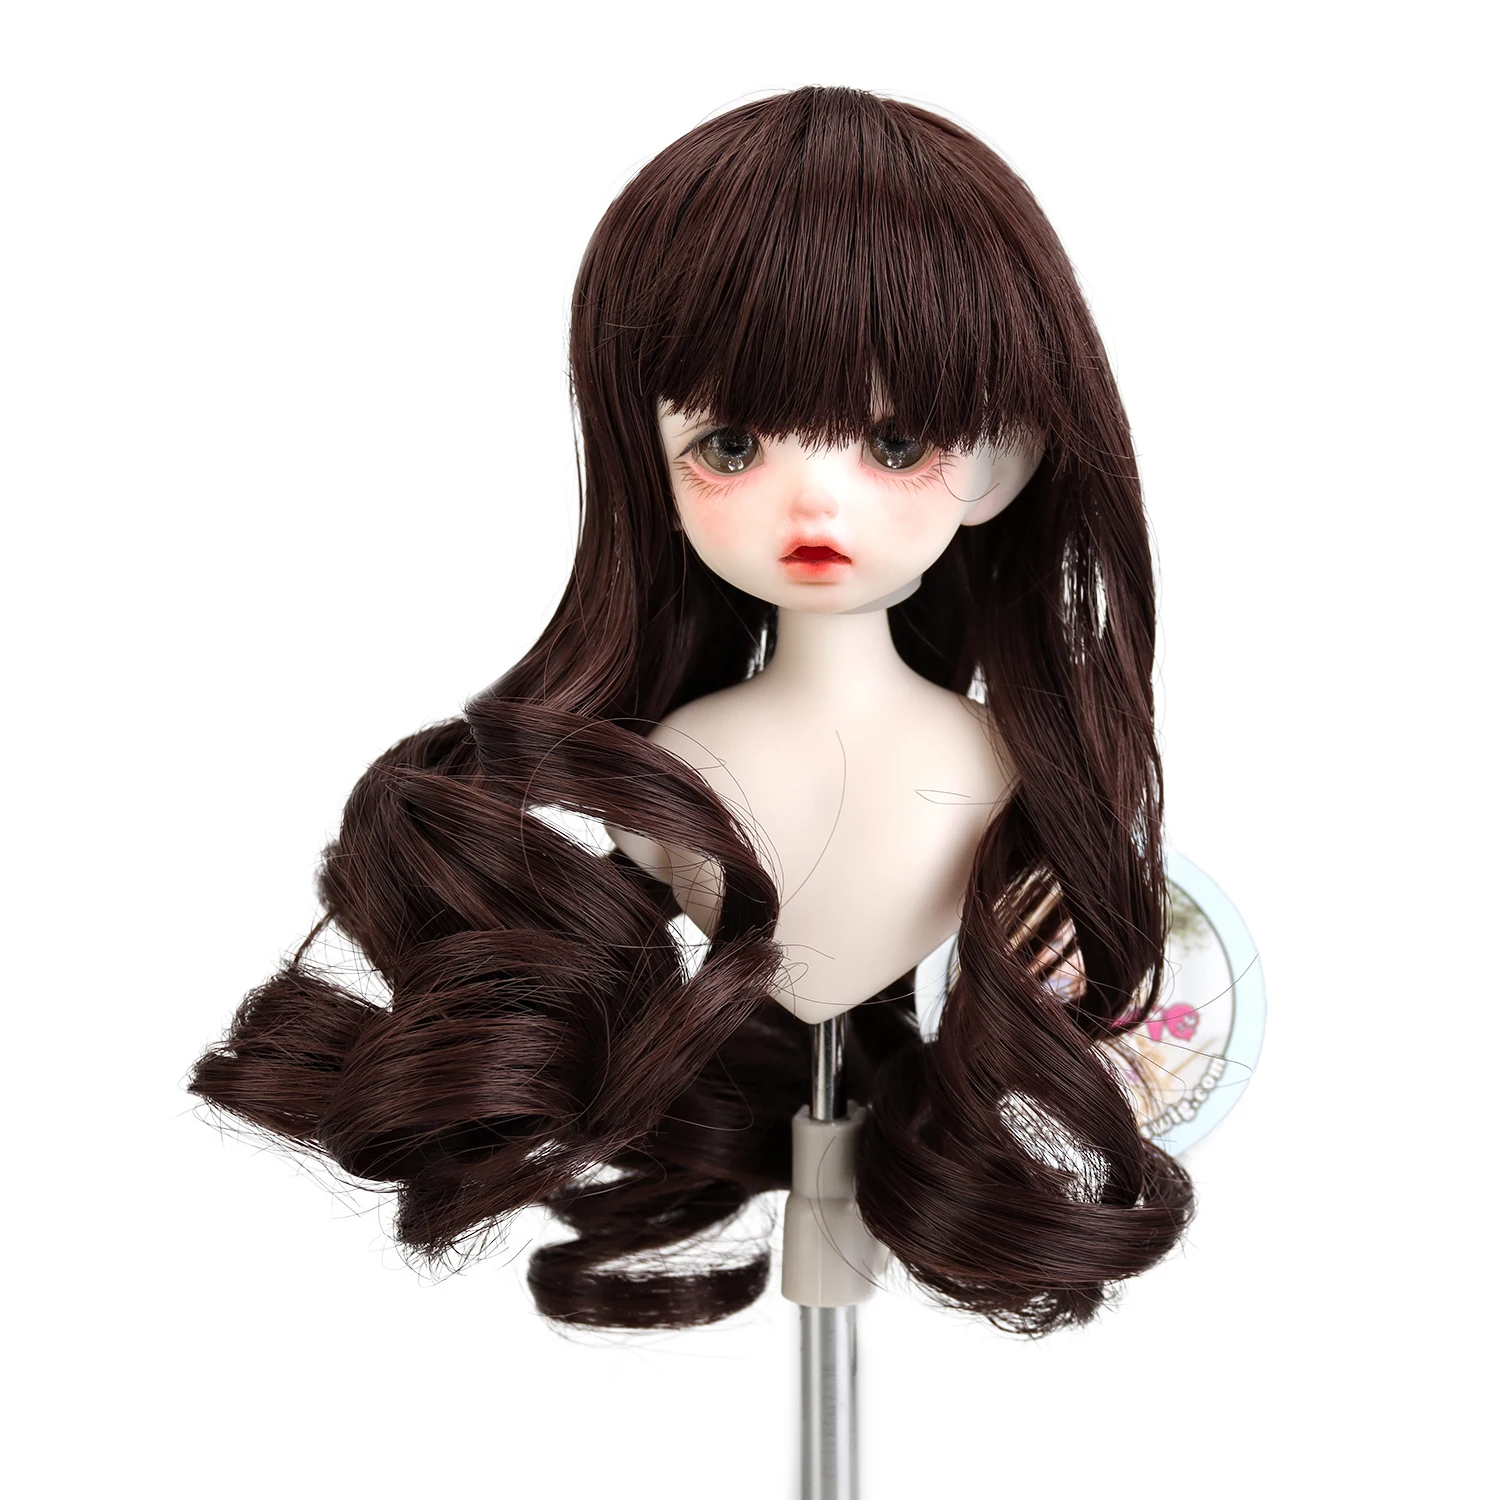 1/6 BJD Doll Wigs 6-7'' Long Curly Natural Color With Bangs MSD DIY Doll Make Accessories Doll Tress Wig Hair doll wig bangs 5 100cm tress curly hair extensions for bjd blyth american all dolls accesories